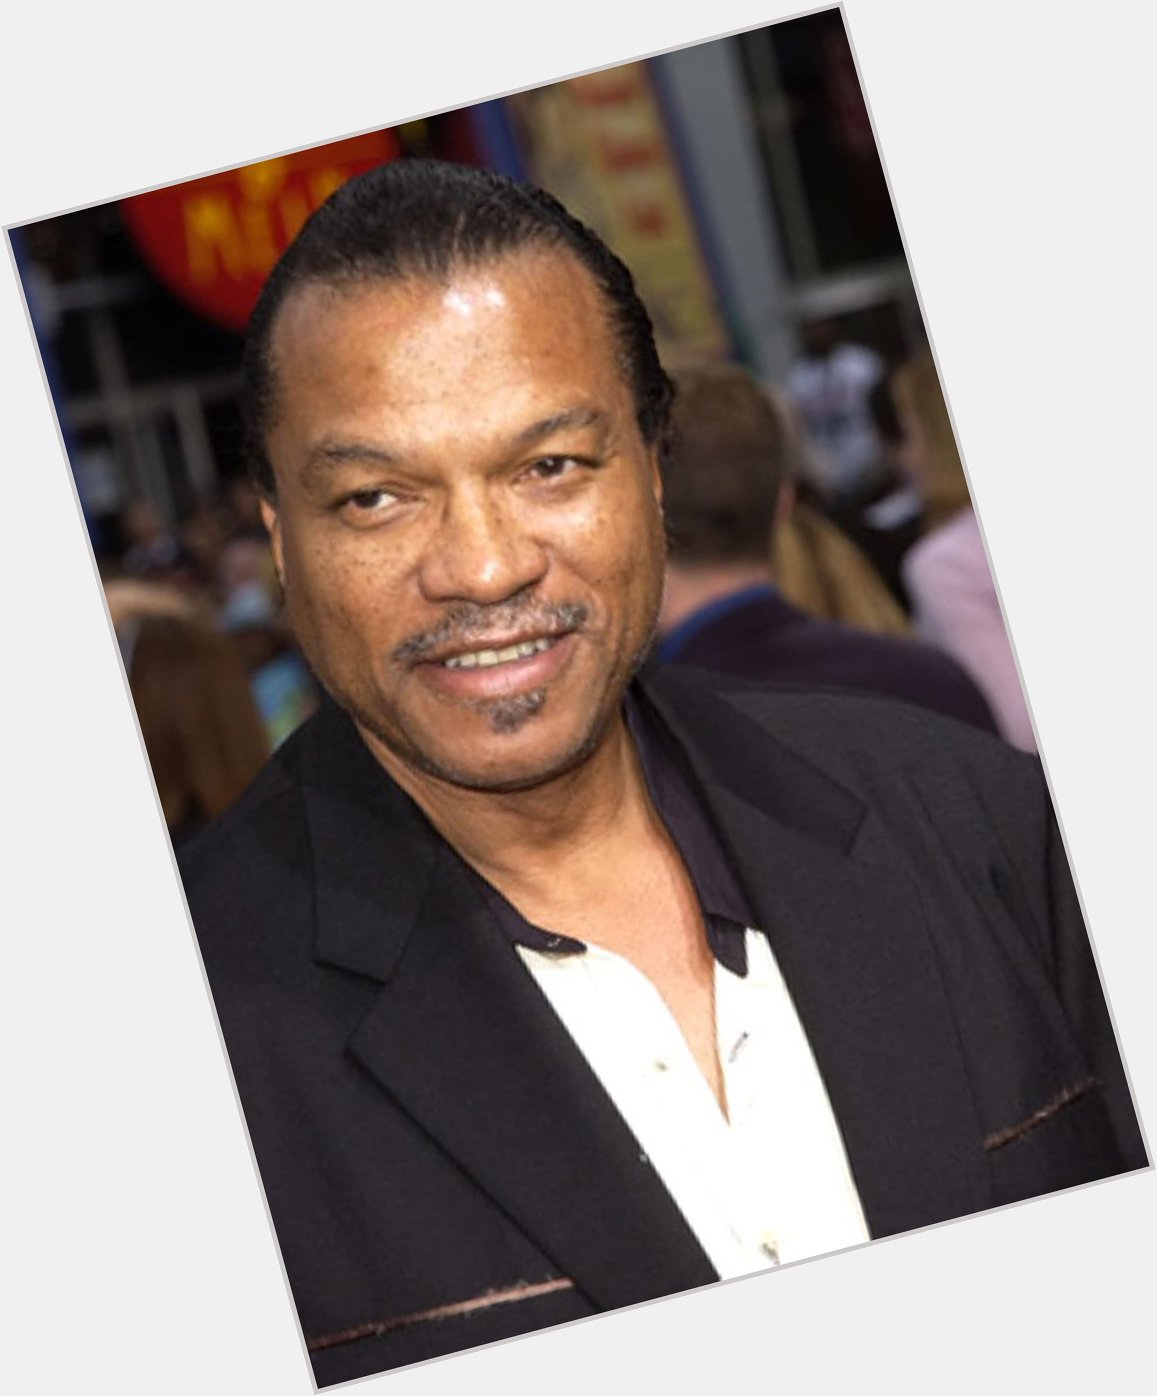 Happy Birthday to Billy Dee Williams! 

What is the first thing that comes to mind when you see his picture? 